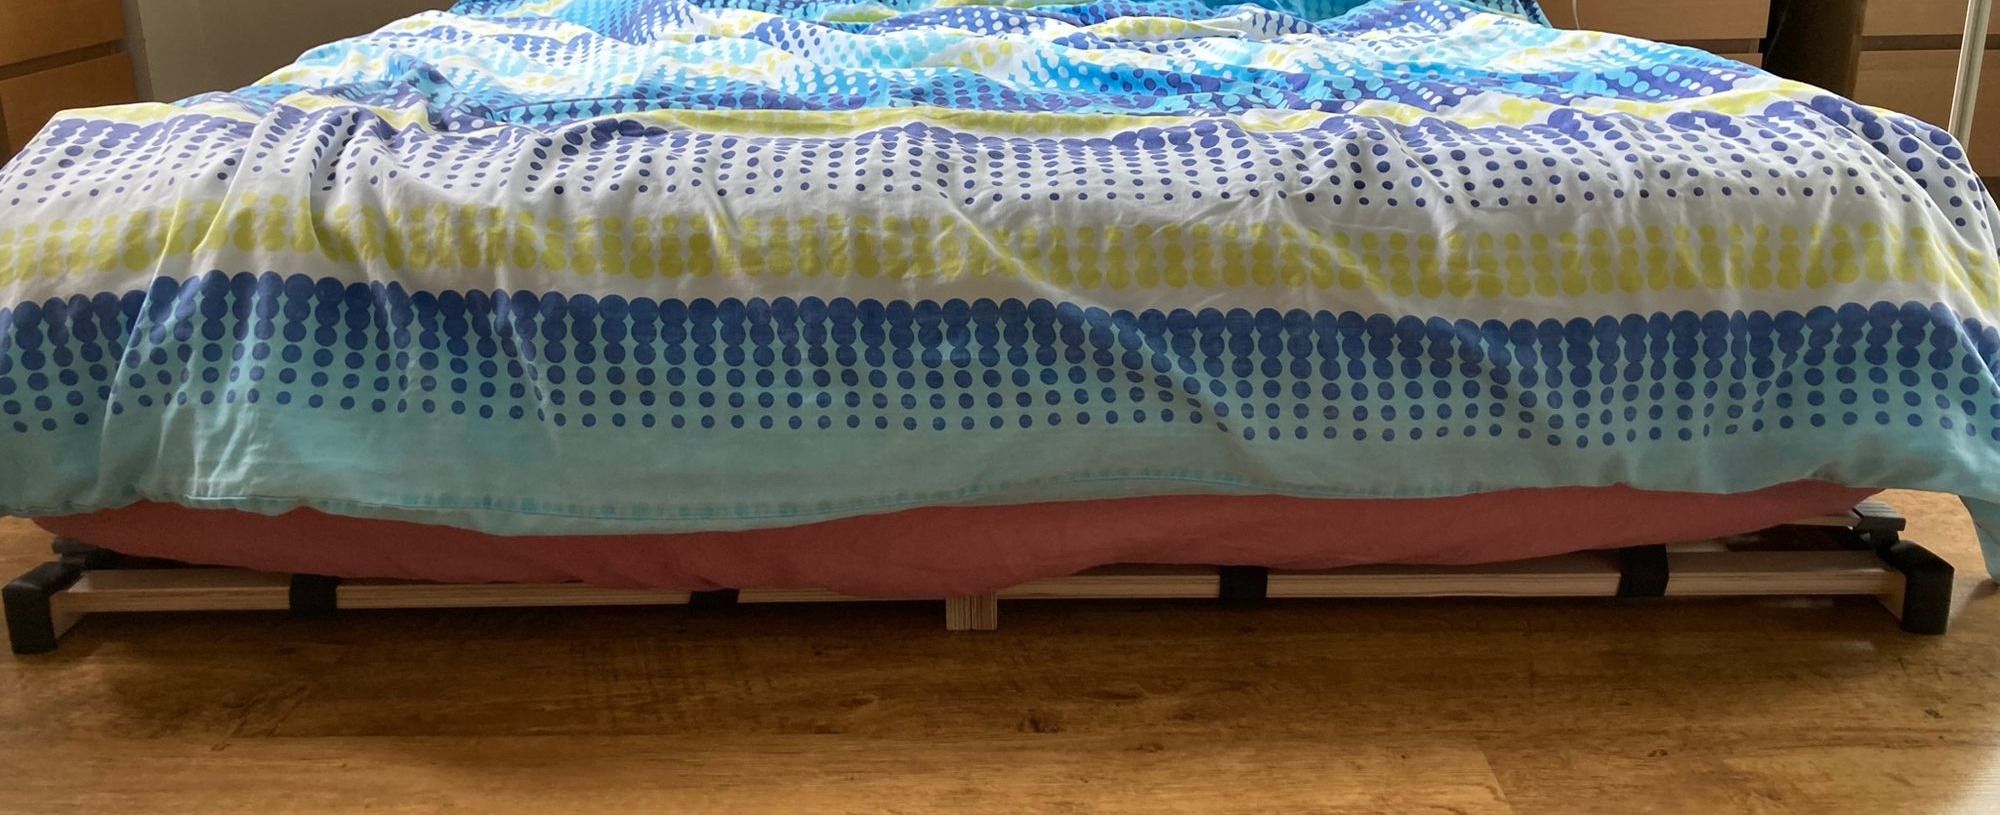 Foot of the bed; you see a tiny frame under the mattress sticking out, with black pads covering corners.